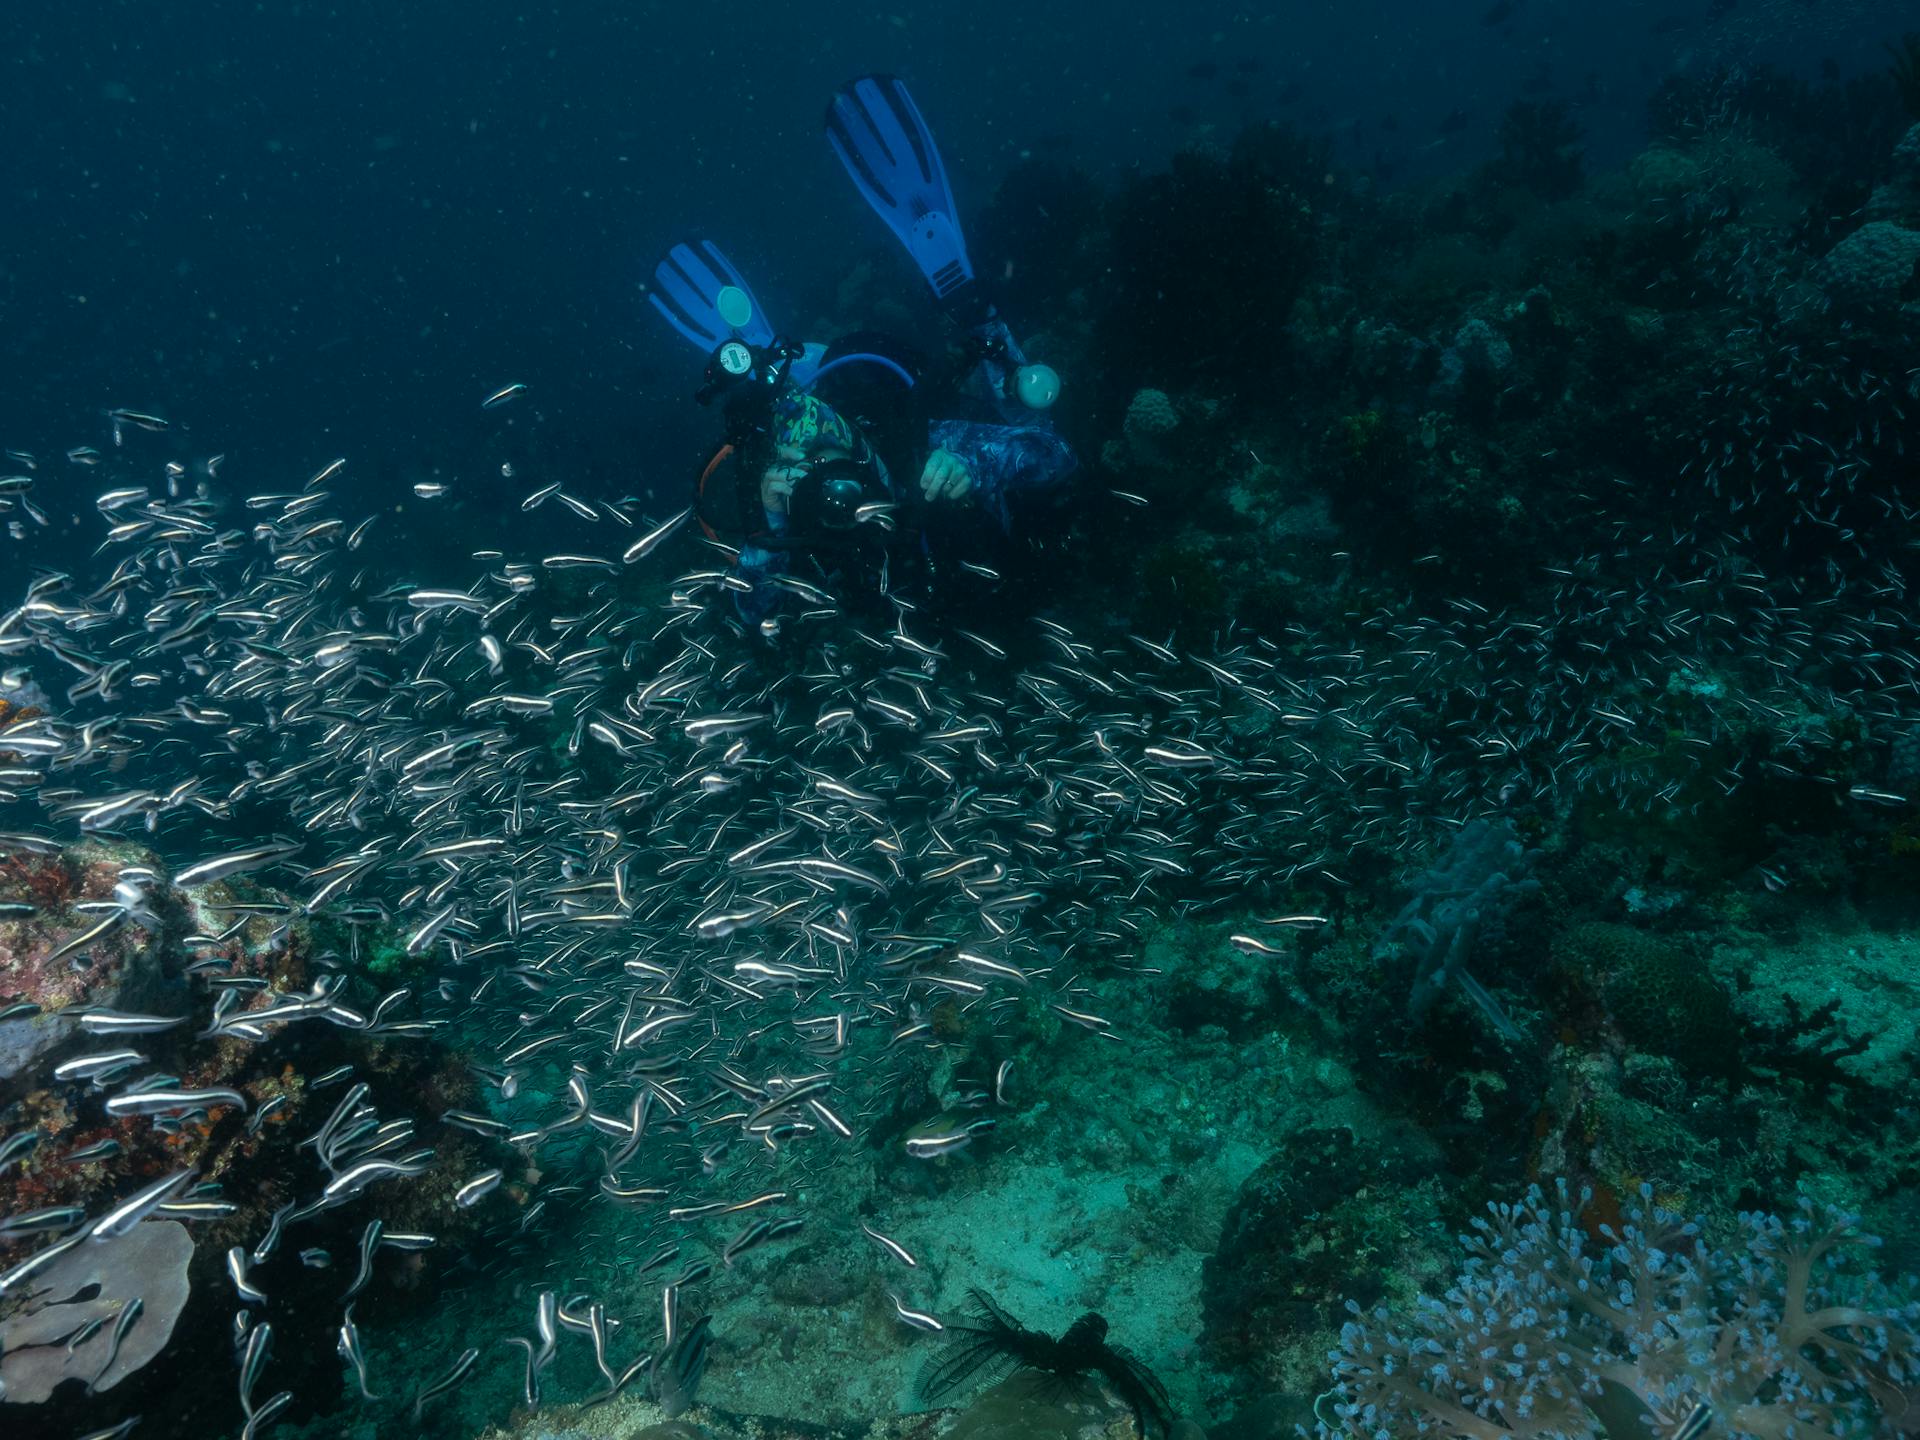 Diver photographing a school of fish